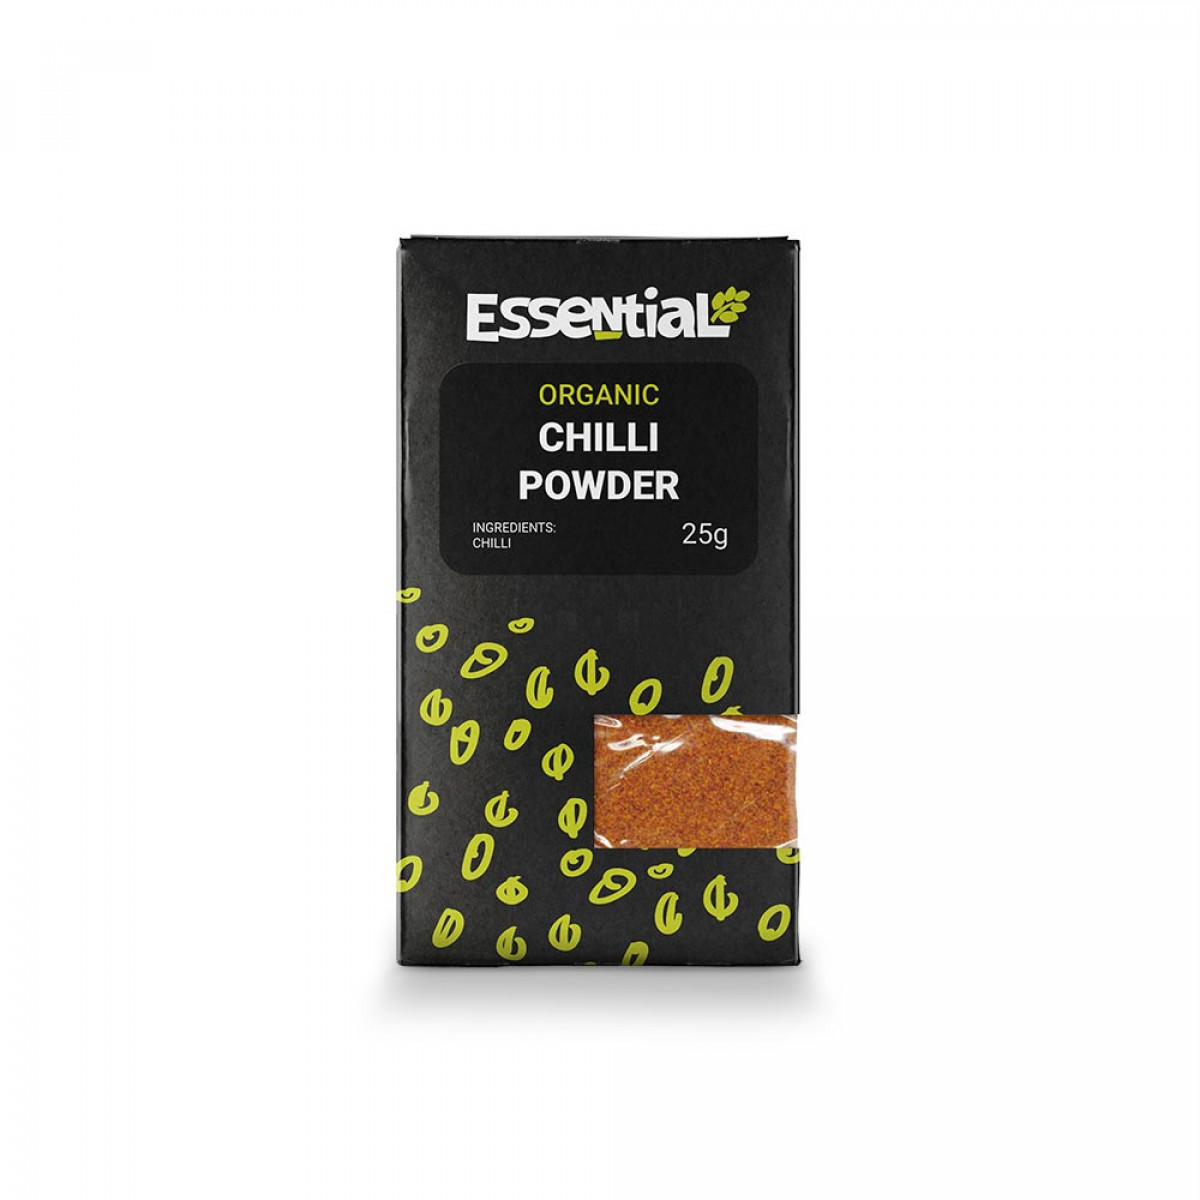 Product picture for Chilli Powder